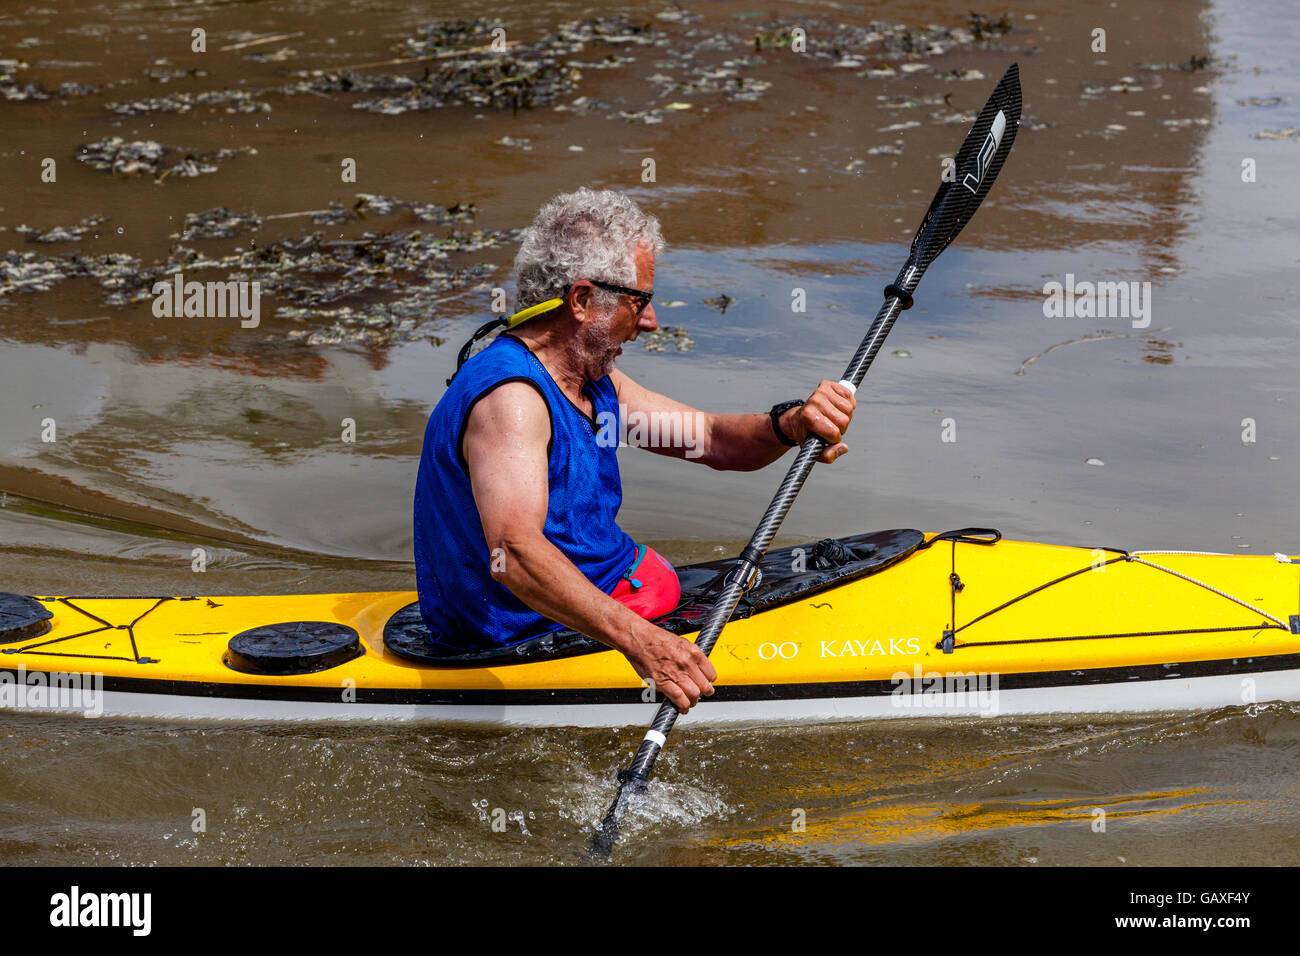 An Elderly Man Kayaking On The River Ouse, Lewes, Sussex, UK Stock Photo